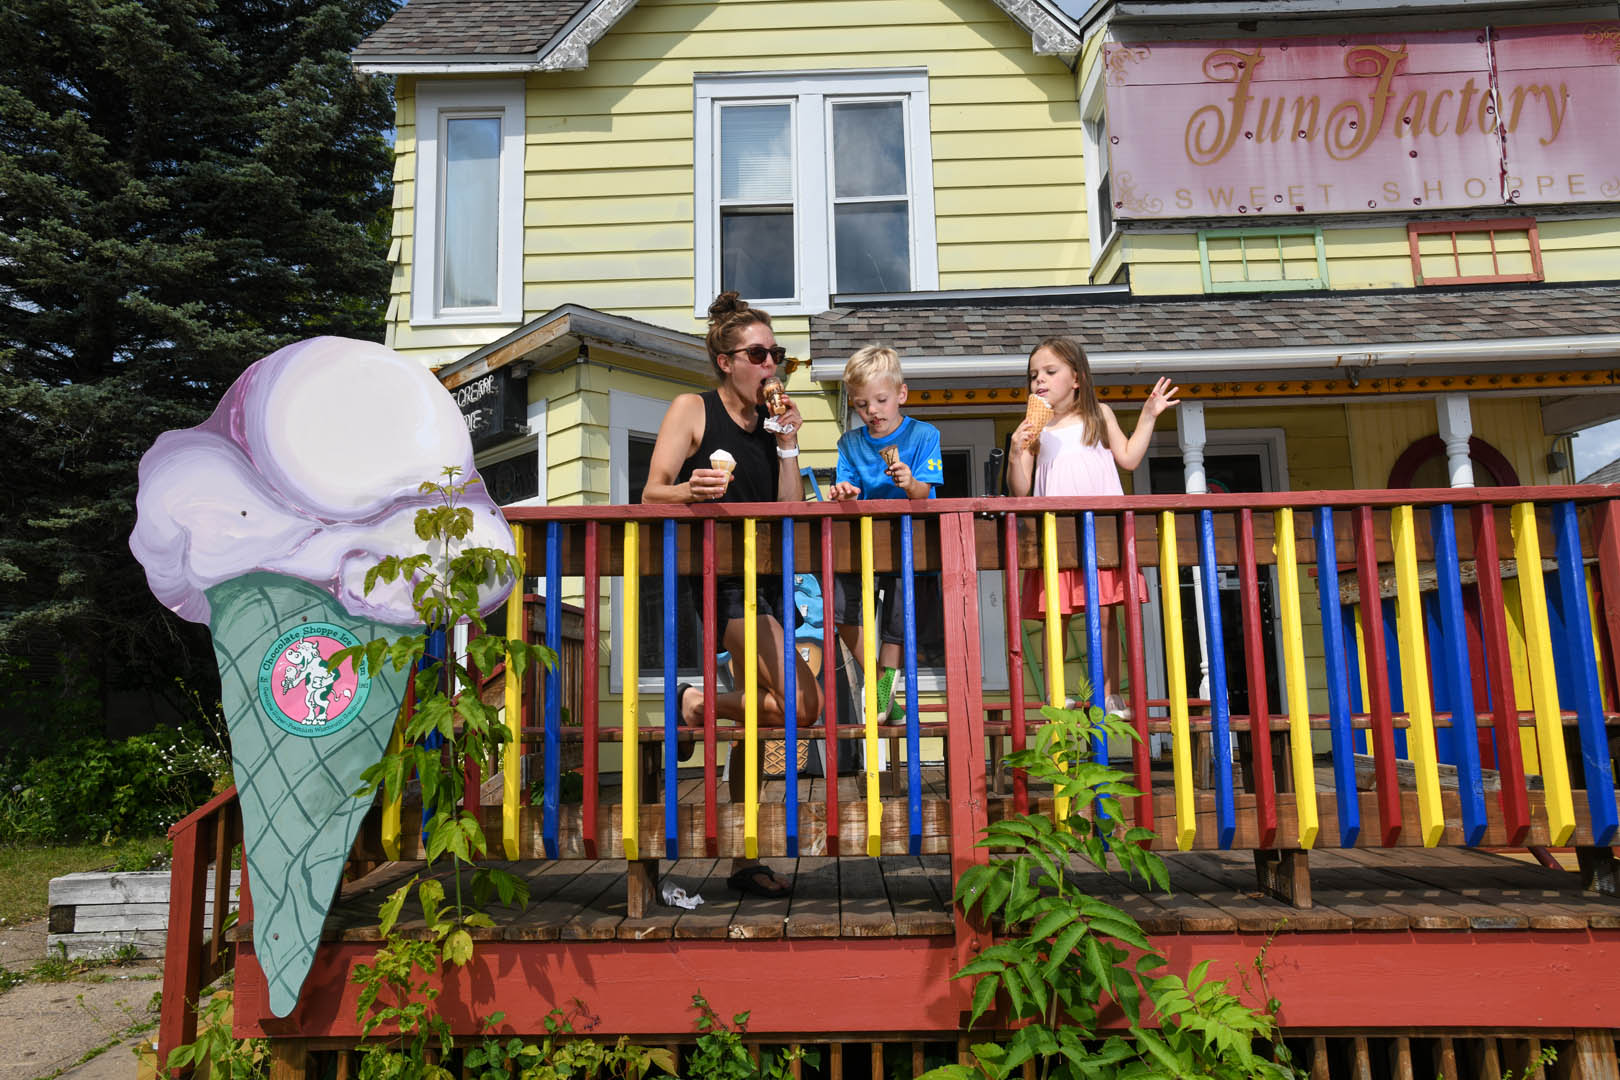 A family eating sweet ice cream treats in front of the Fun Factory Sweet Shoppe